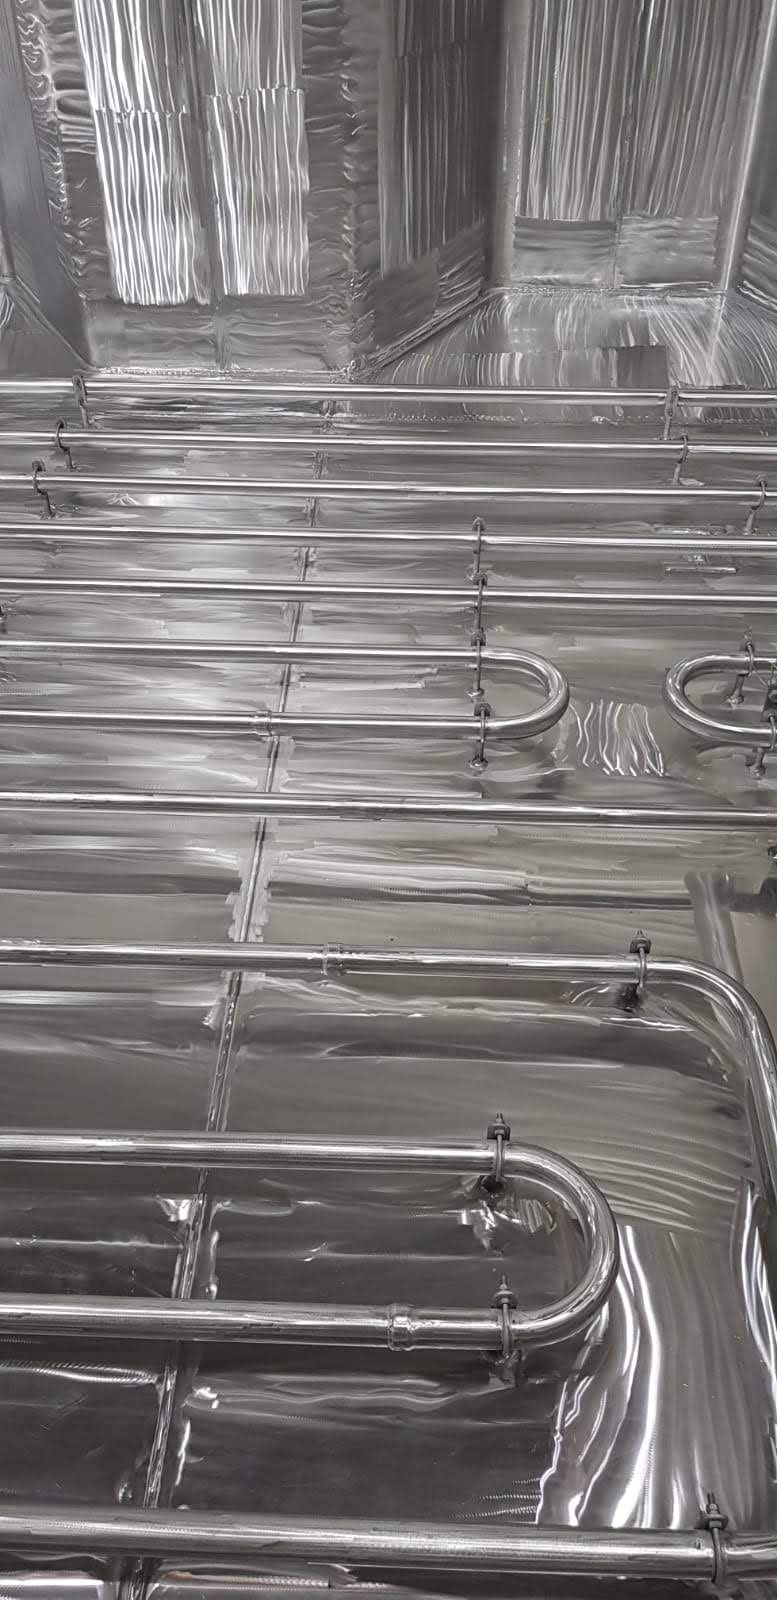 Stainless Steel Cargo Tank after Grinding and Polishing - Stainless Steel Heating Coils after Grinding and Polishing